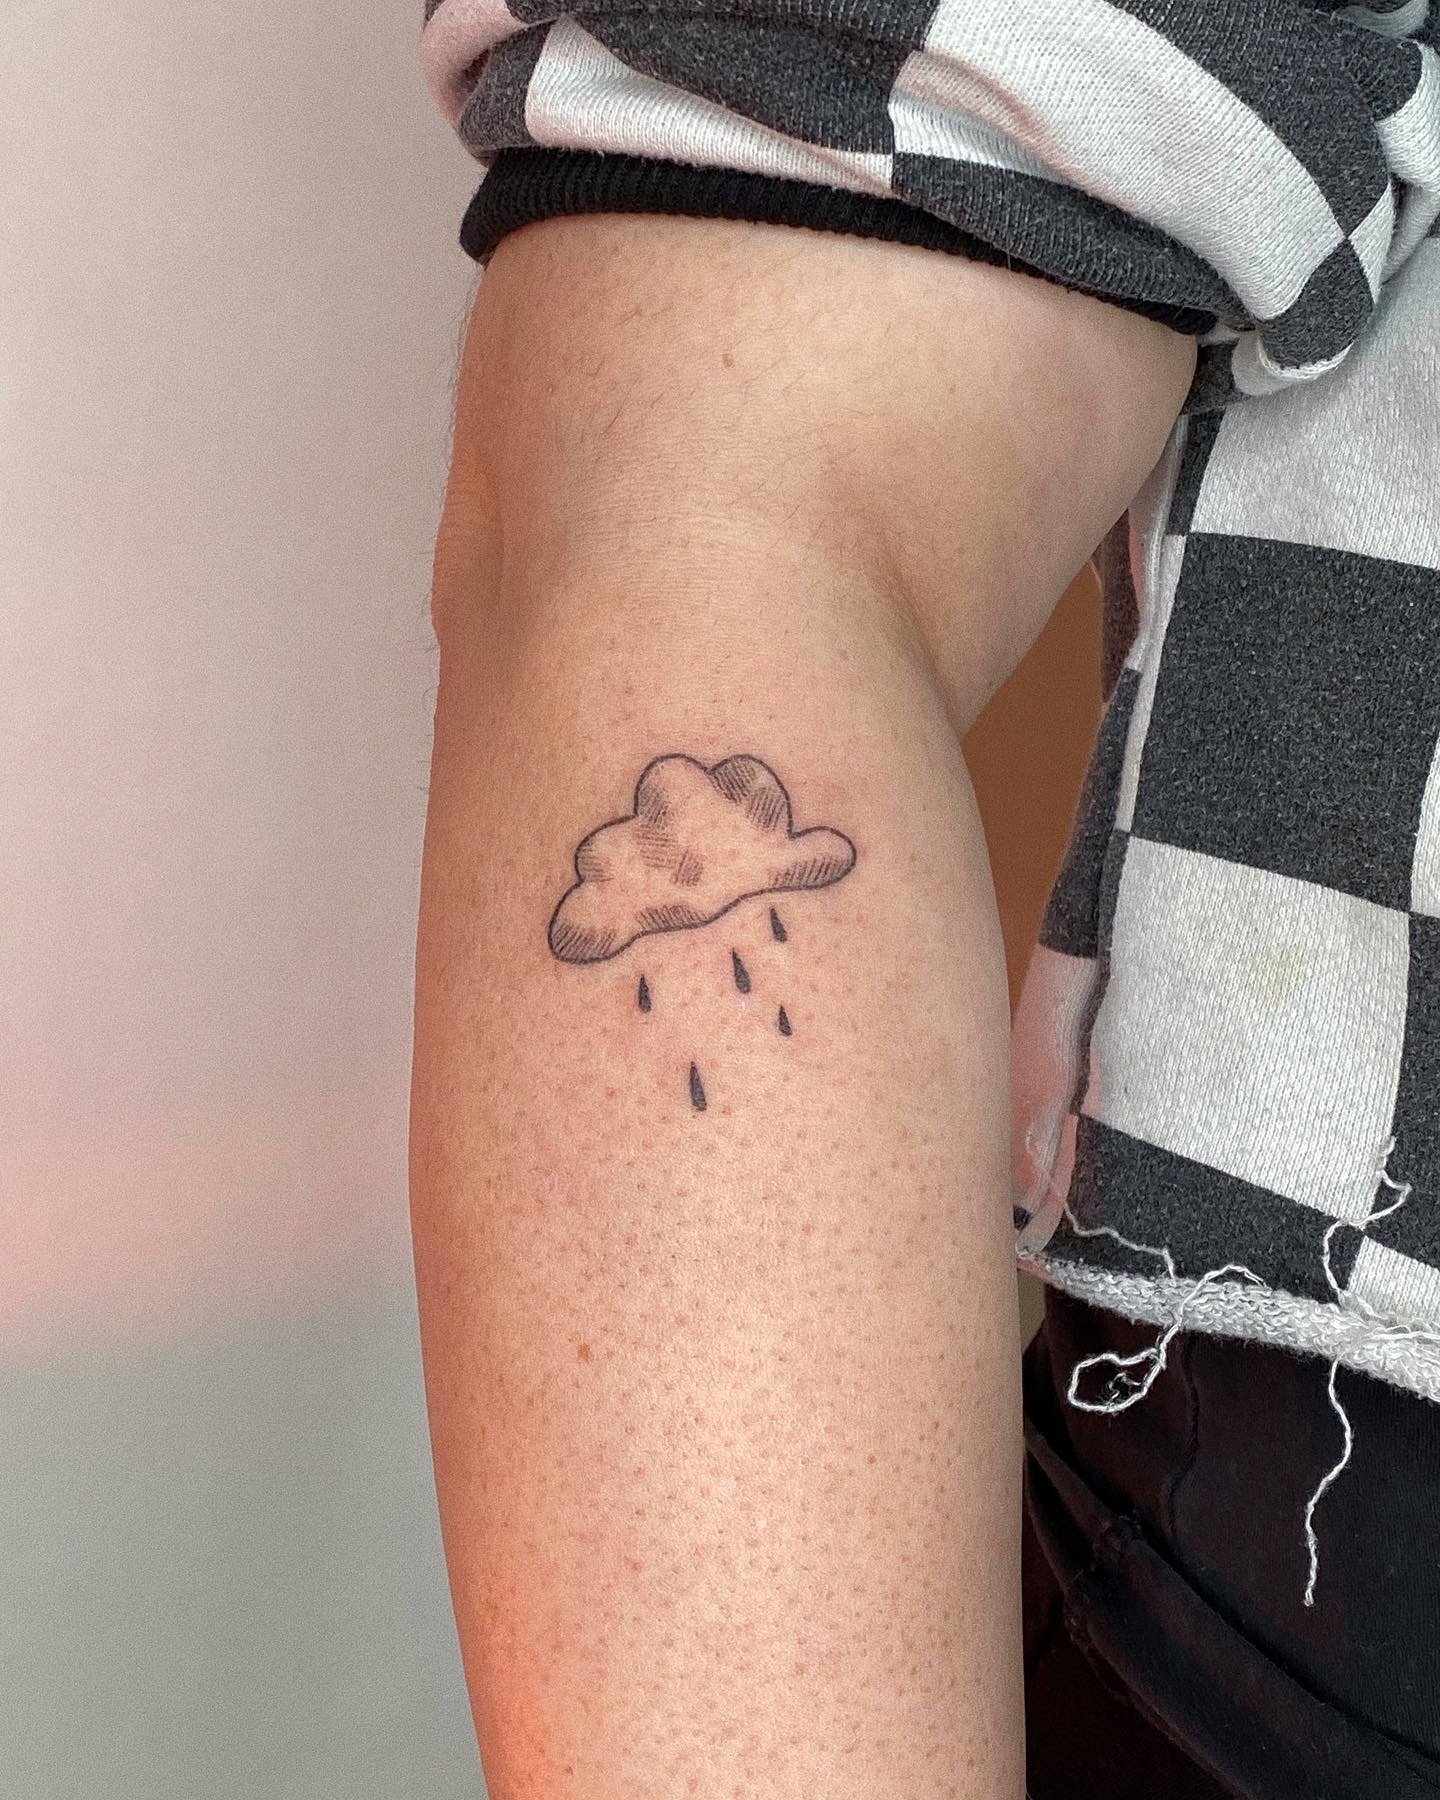 12 Cloud Tattoos and Meanings Cloud Tattoo Inspiration and Meanings